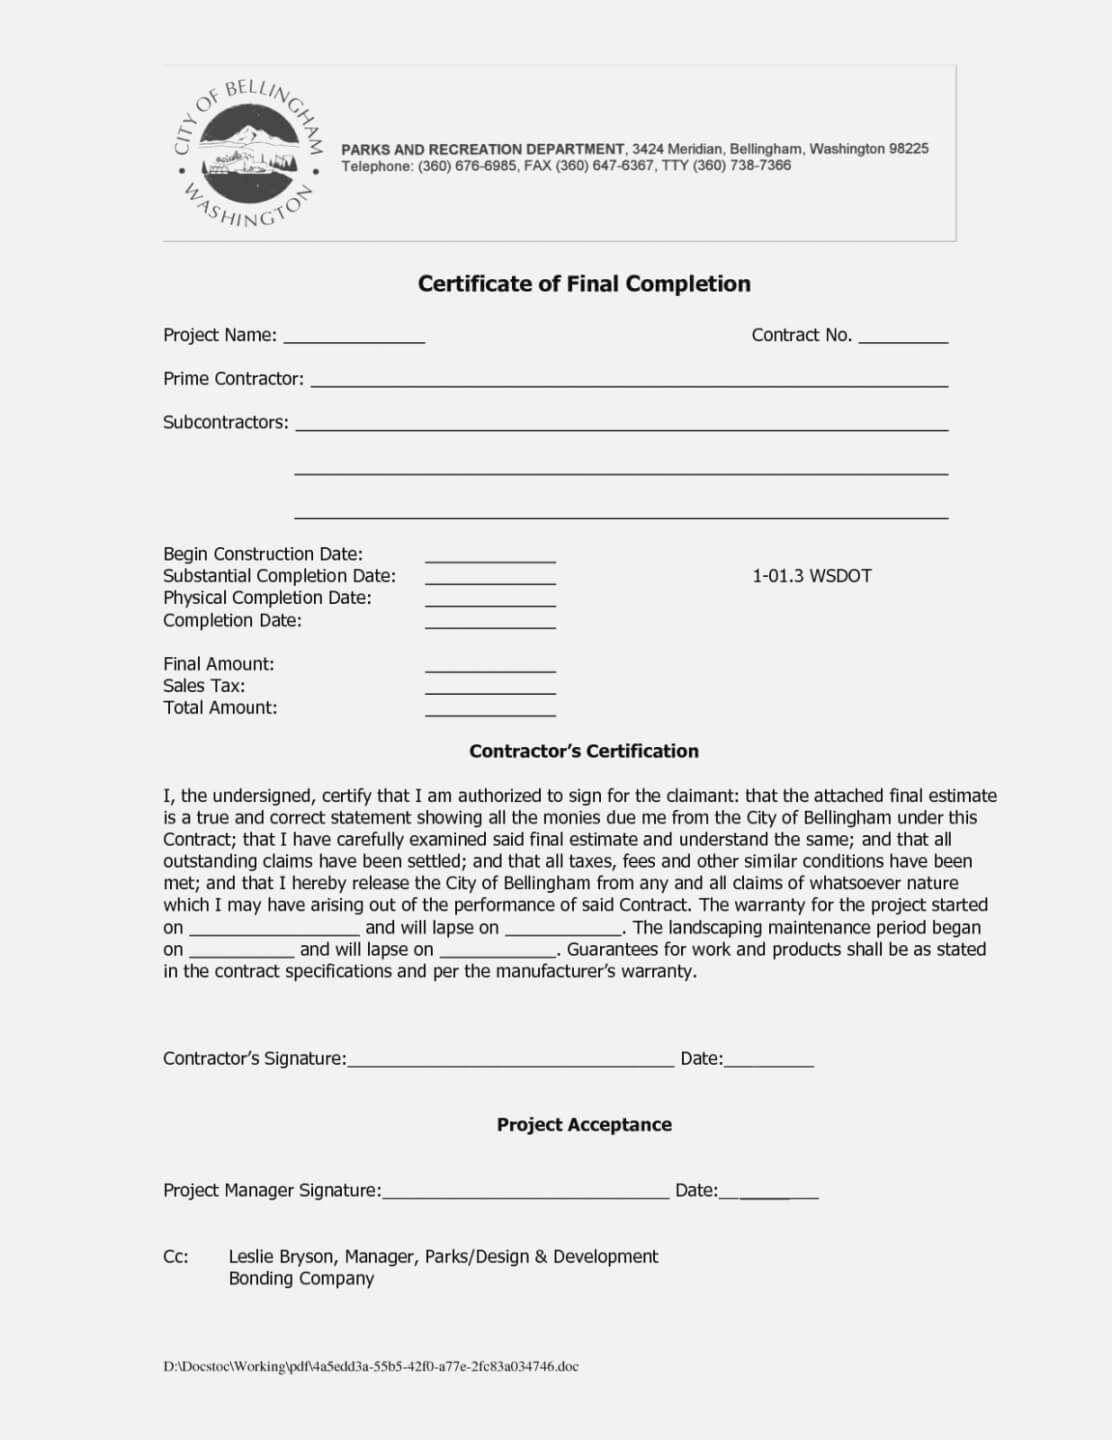 Roofing Certificate Of Completion Template – Yatay For Roof Certification Template